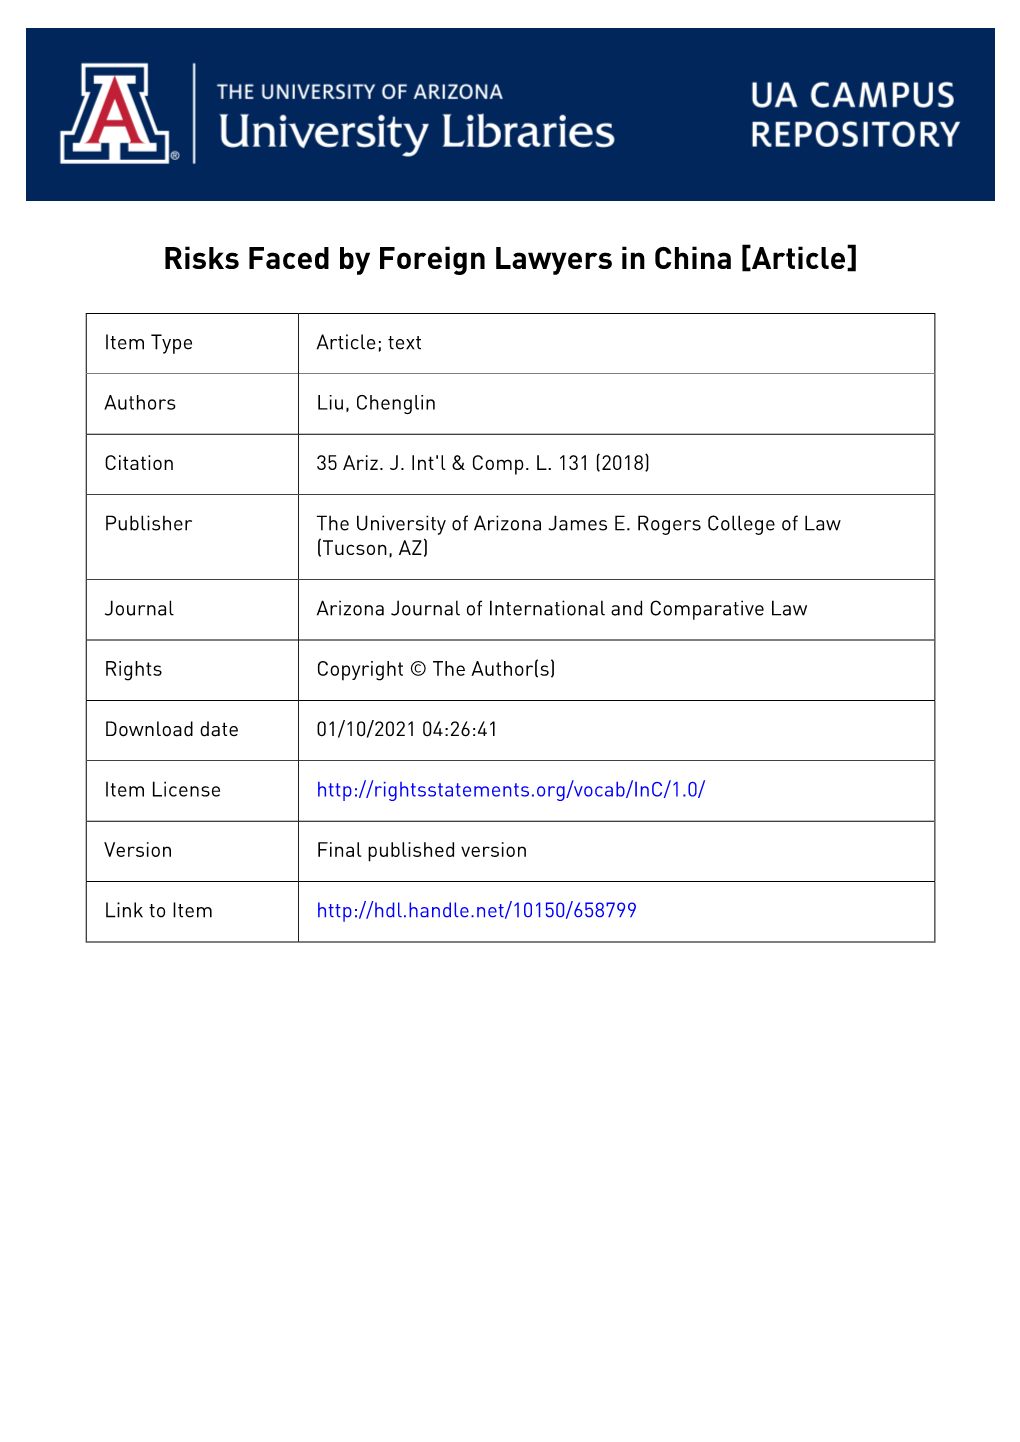 Risks Faced by Foreign Lawyers in China [Article]